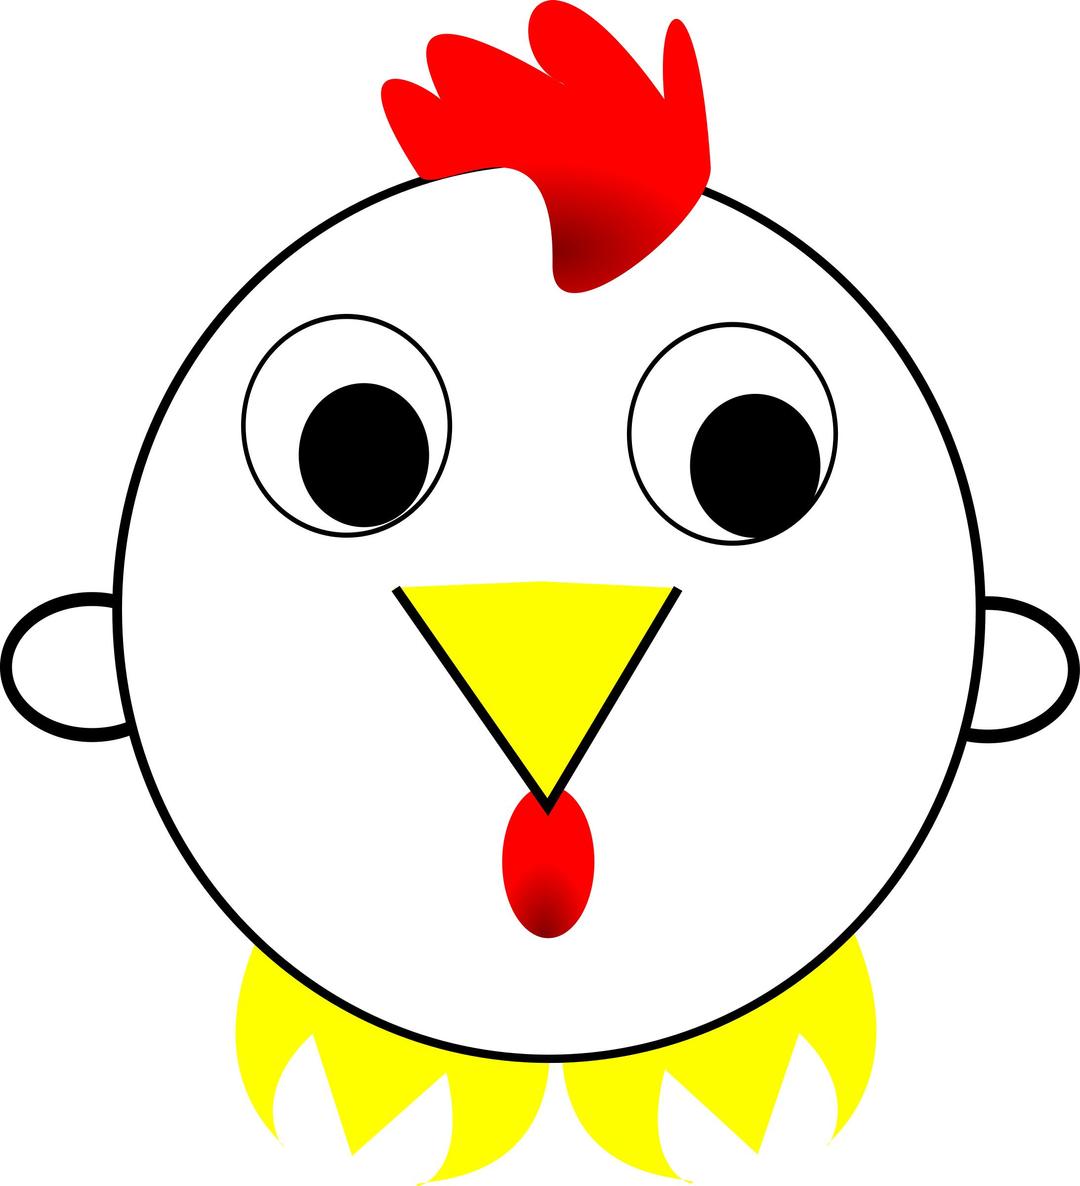 Chinese zodiac rooster png transparent